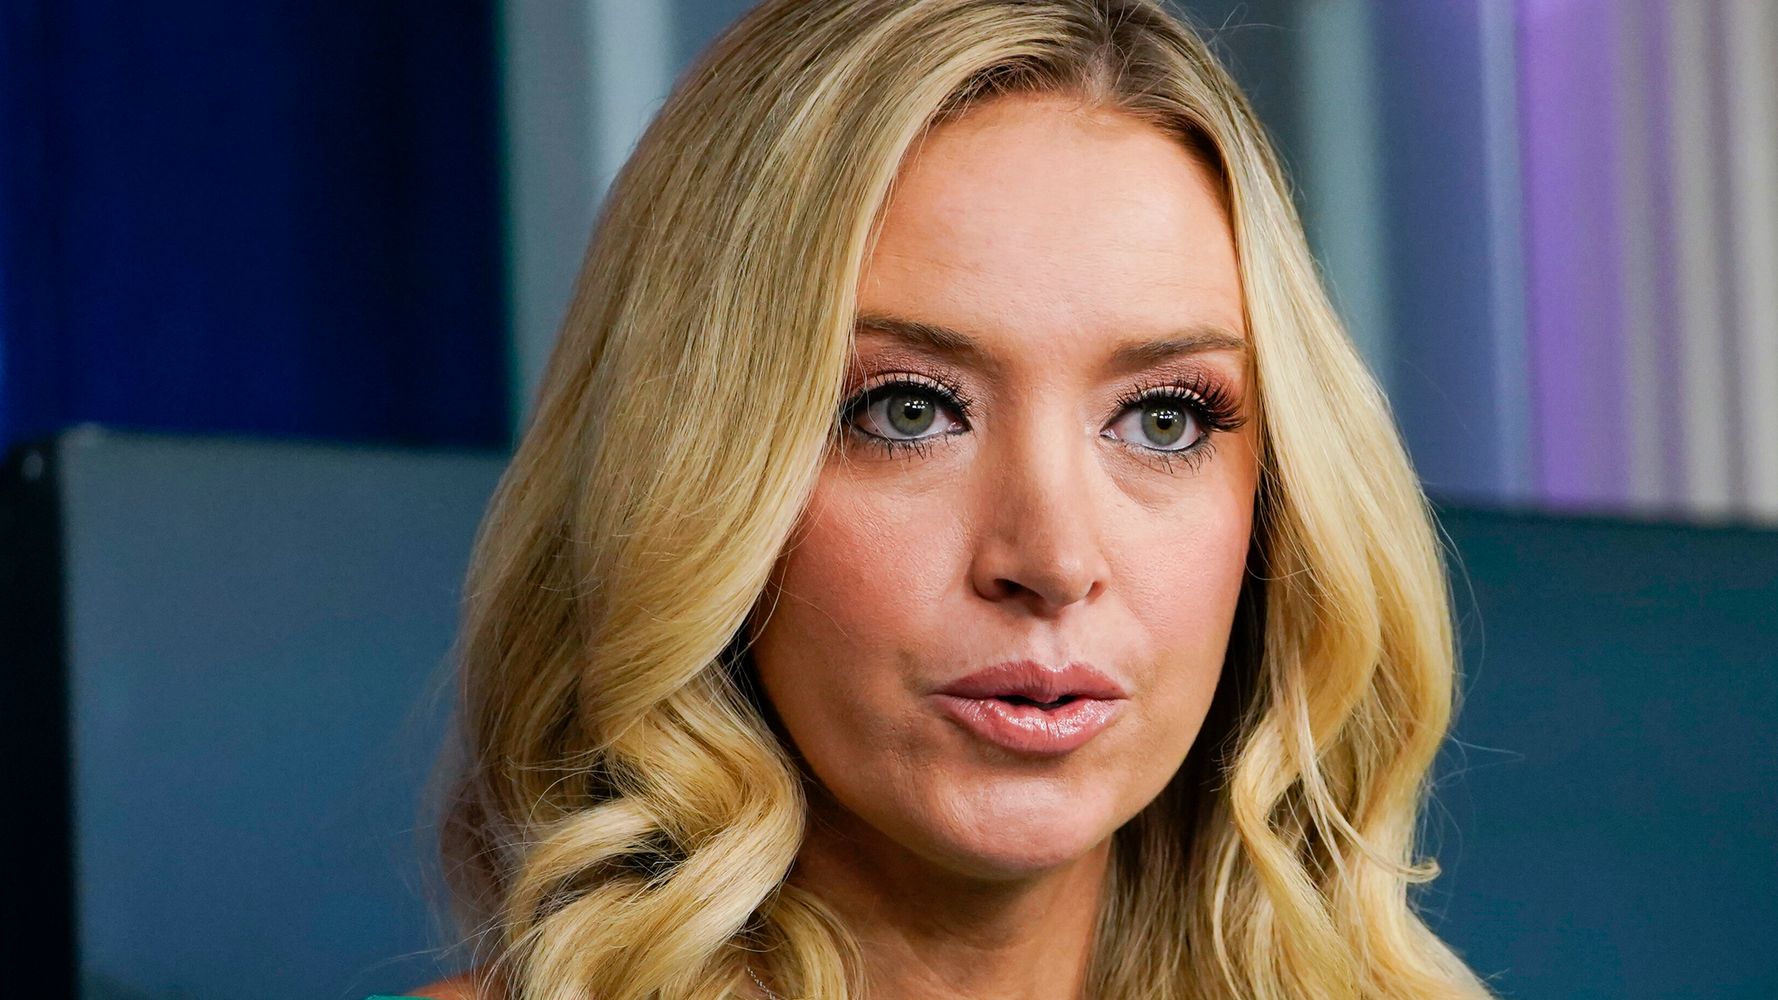 Kayleigh McEnany’s Latest Trump Lie Is Firmly Debunked In Stinging Viral Video